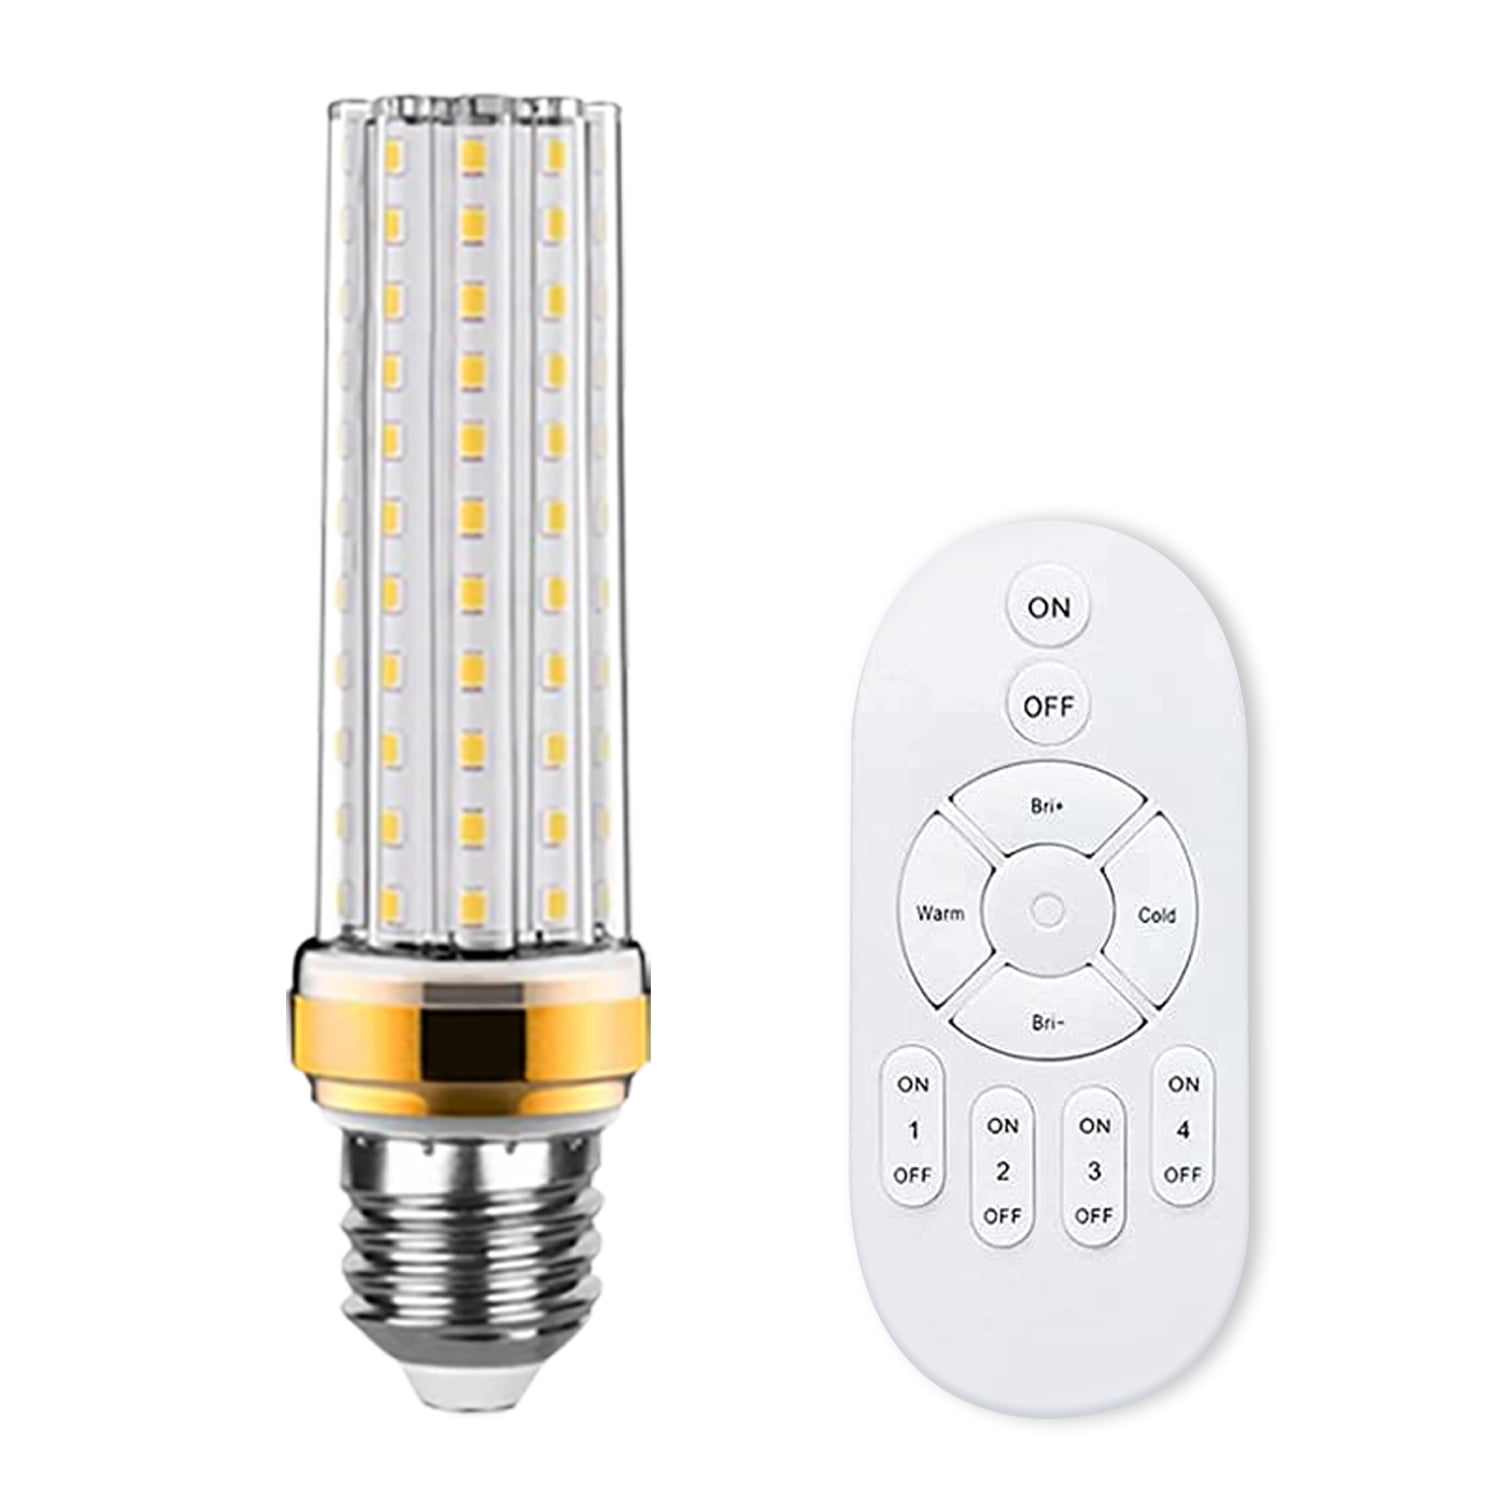 Udsæt violet unlock Smart Corn Led Light Bulb With Remote, 40W Bulbs 5000 Lumen,E27 Smart LED  Light Bulbs Dimmable with 2.4GHz Wireless 3-Zone Remote Control,Adjustable  Color Temperature (Warm / Cool) and Brightness - Walmart.com